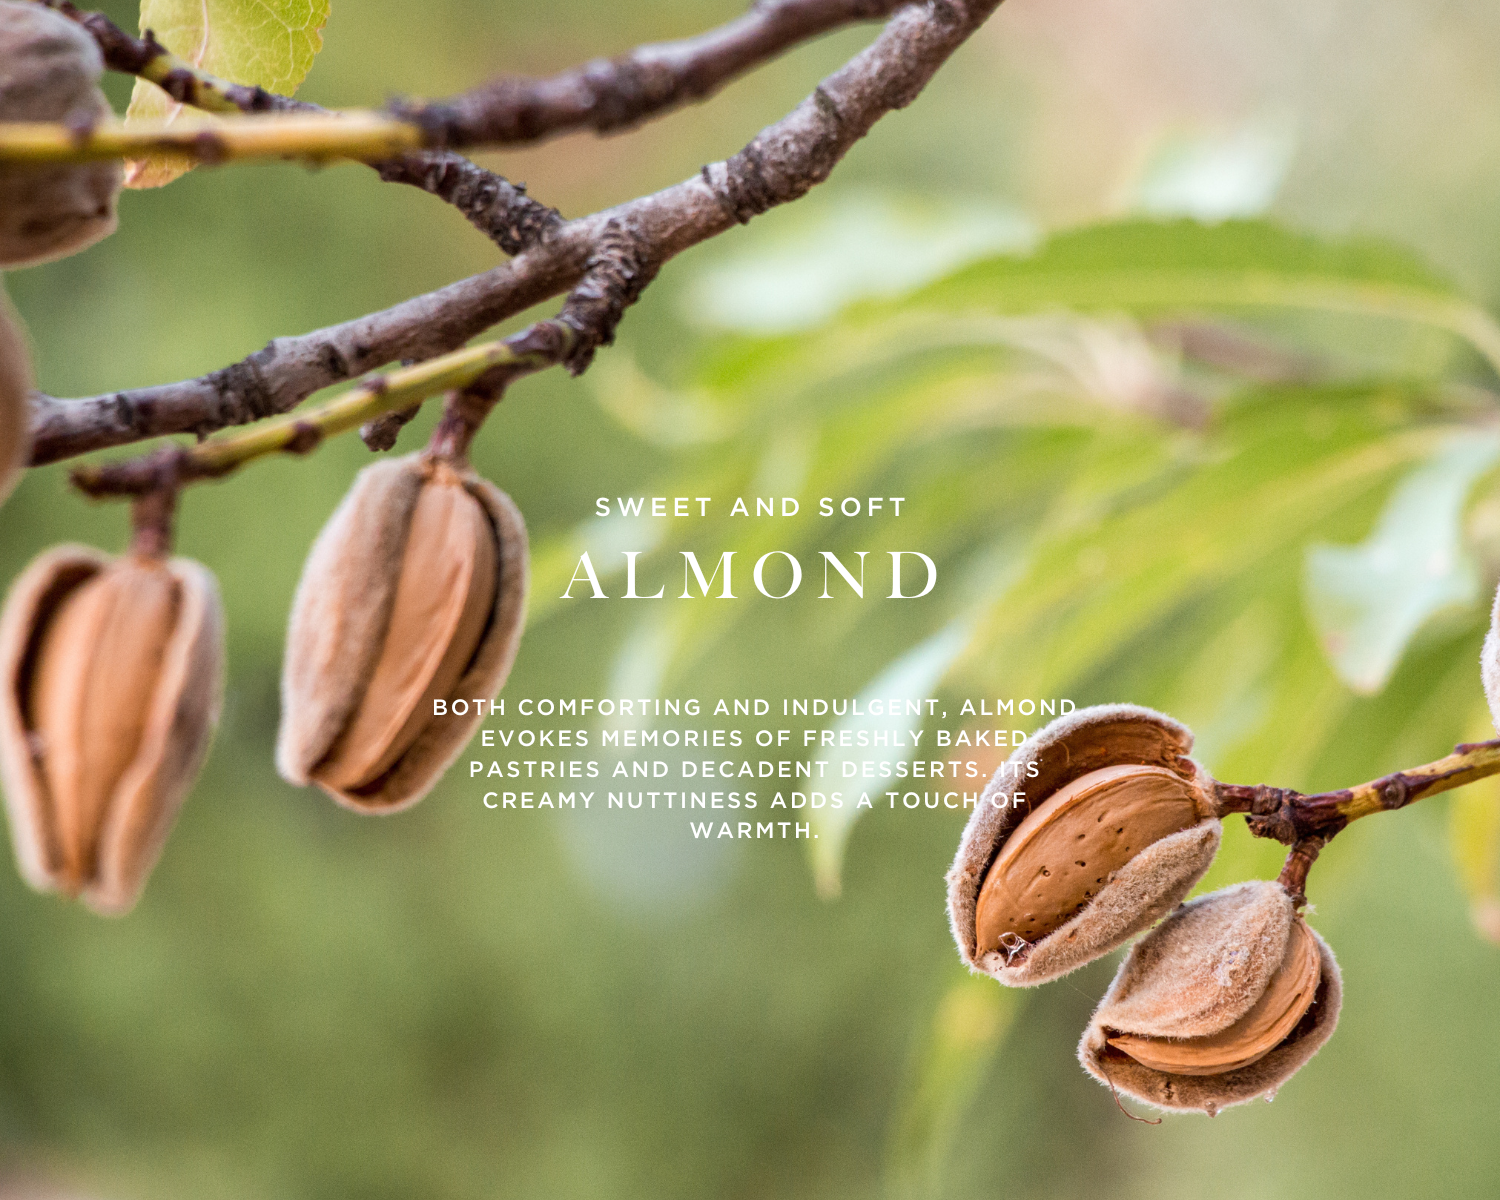 Caswell-Massey Almond Eau de Toilette: Image of almond tree and blossoms to show the primary scent notes